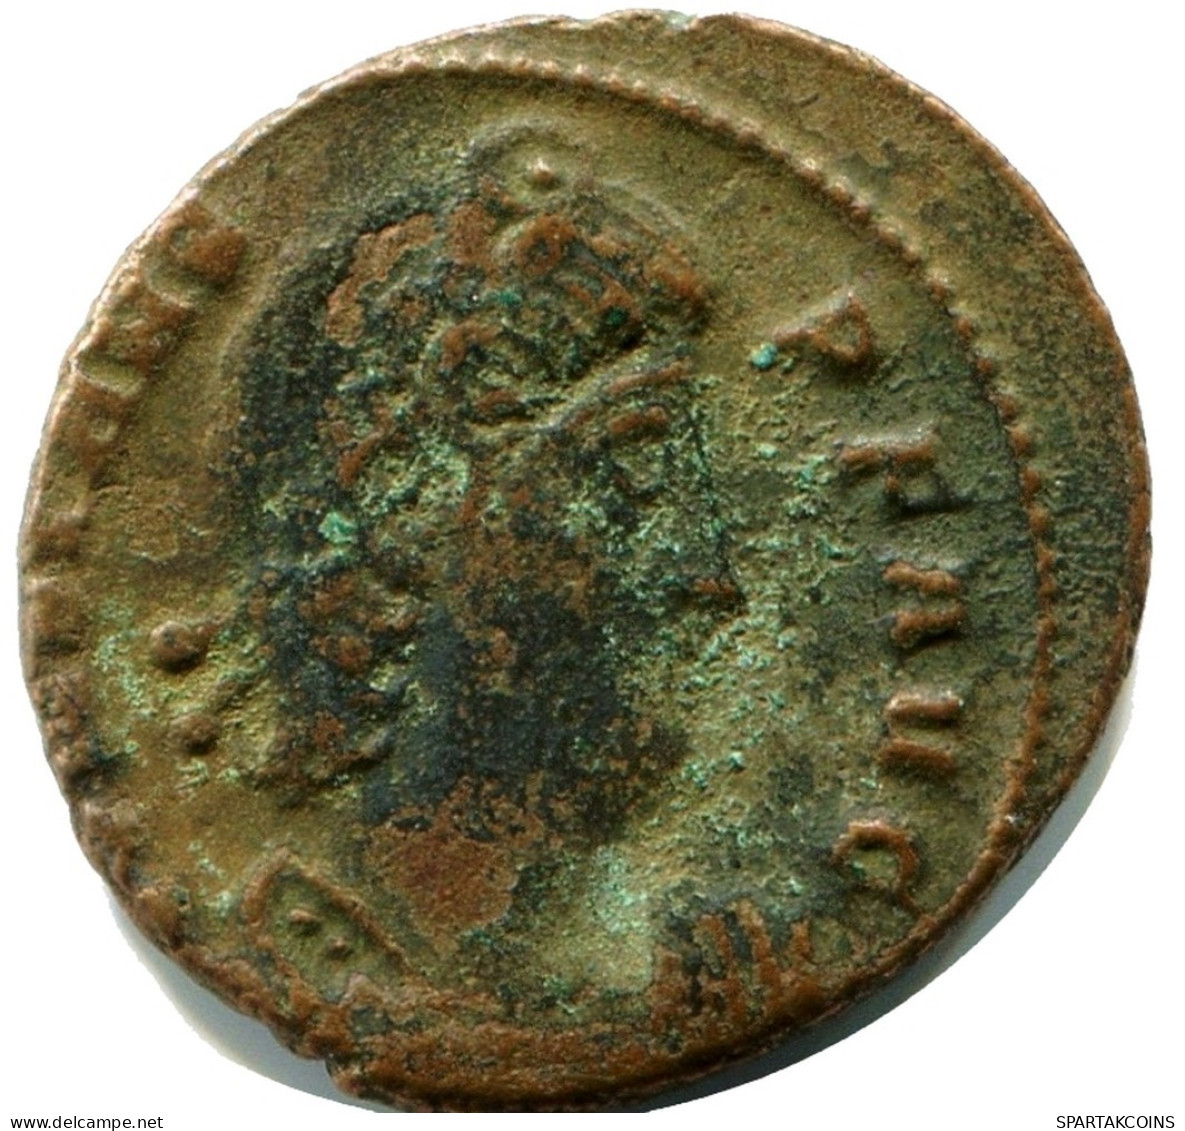 CONSTANS MINTED IN THESSALONICA FROM THE ROYAL ONTARIO MUSEUM #ANC11907.14.U.A - L'Empire Chrétien (307 à 363)